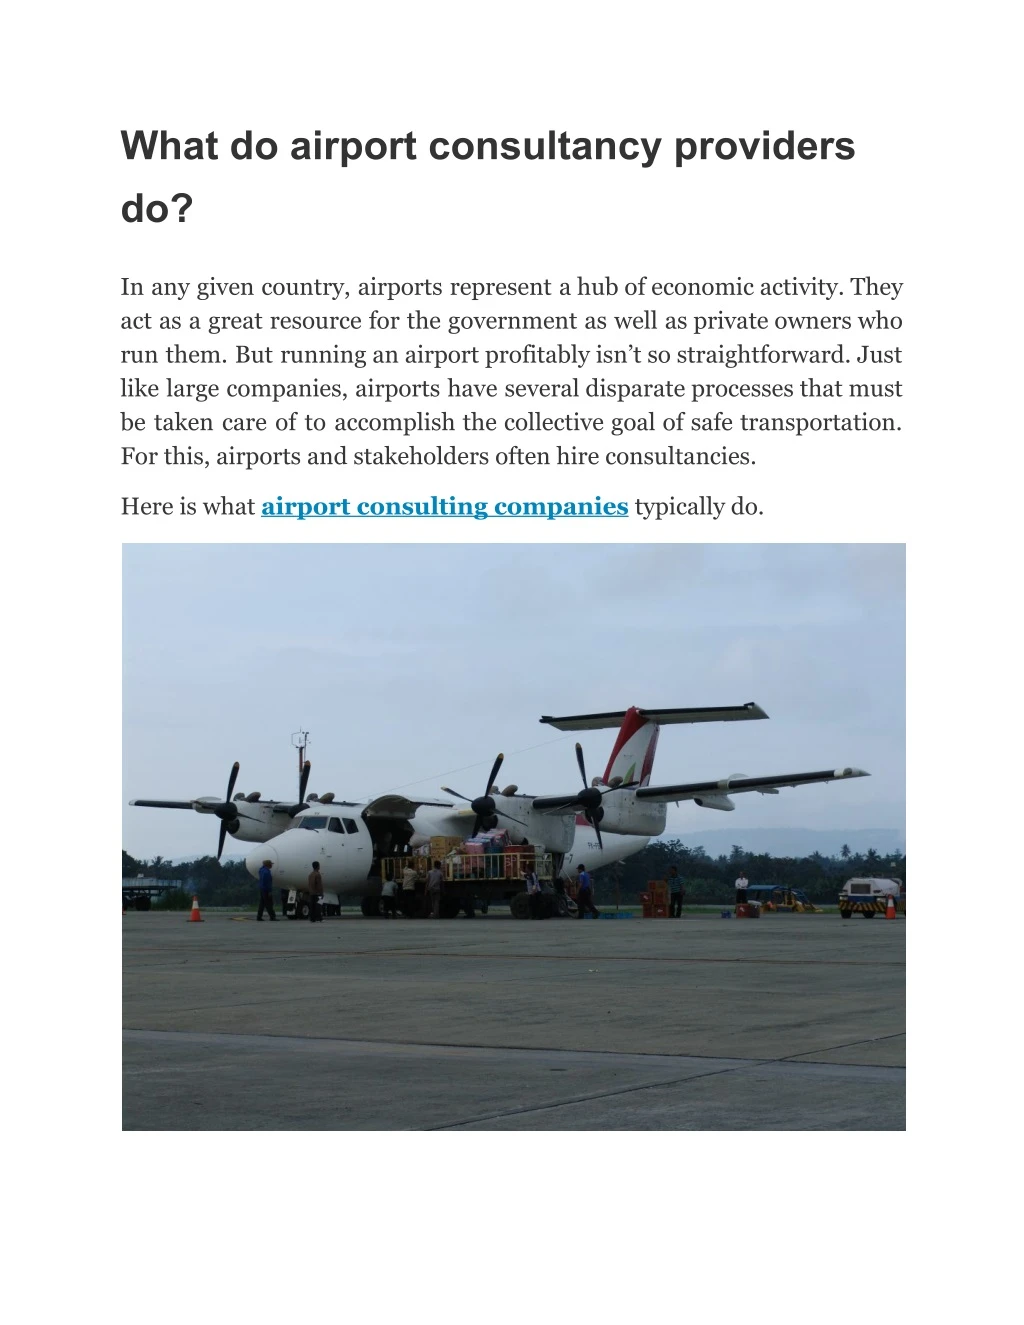 what do airport consultancy providers do